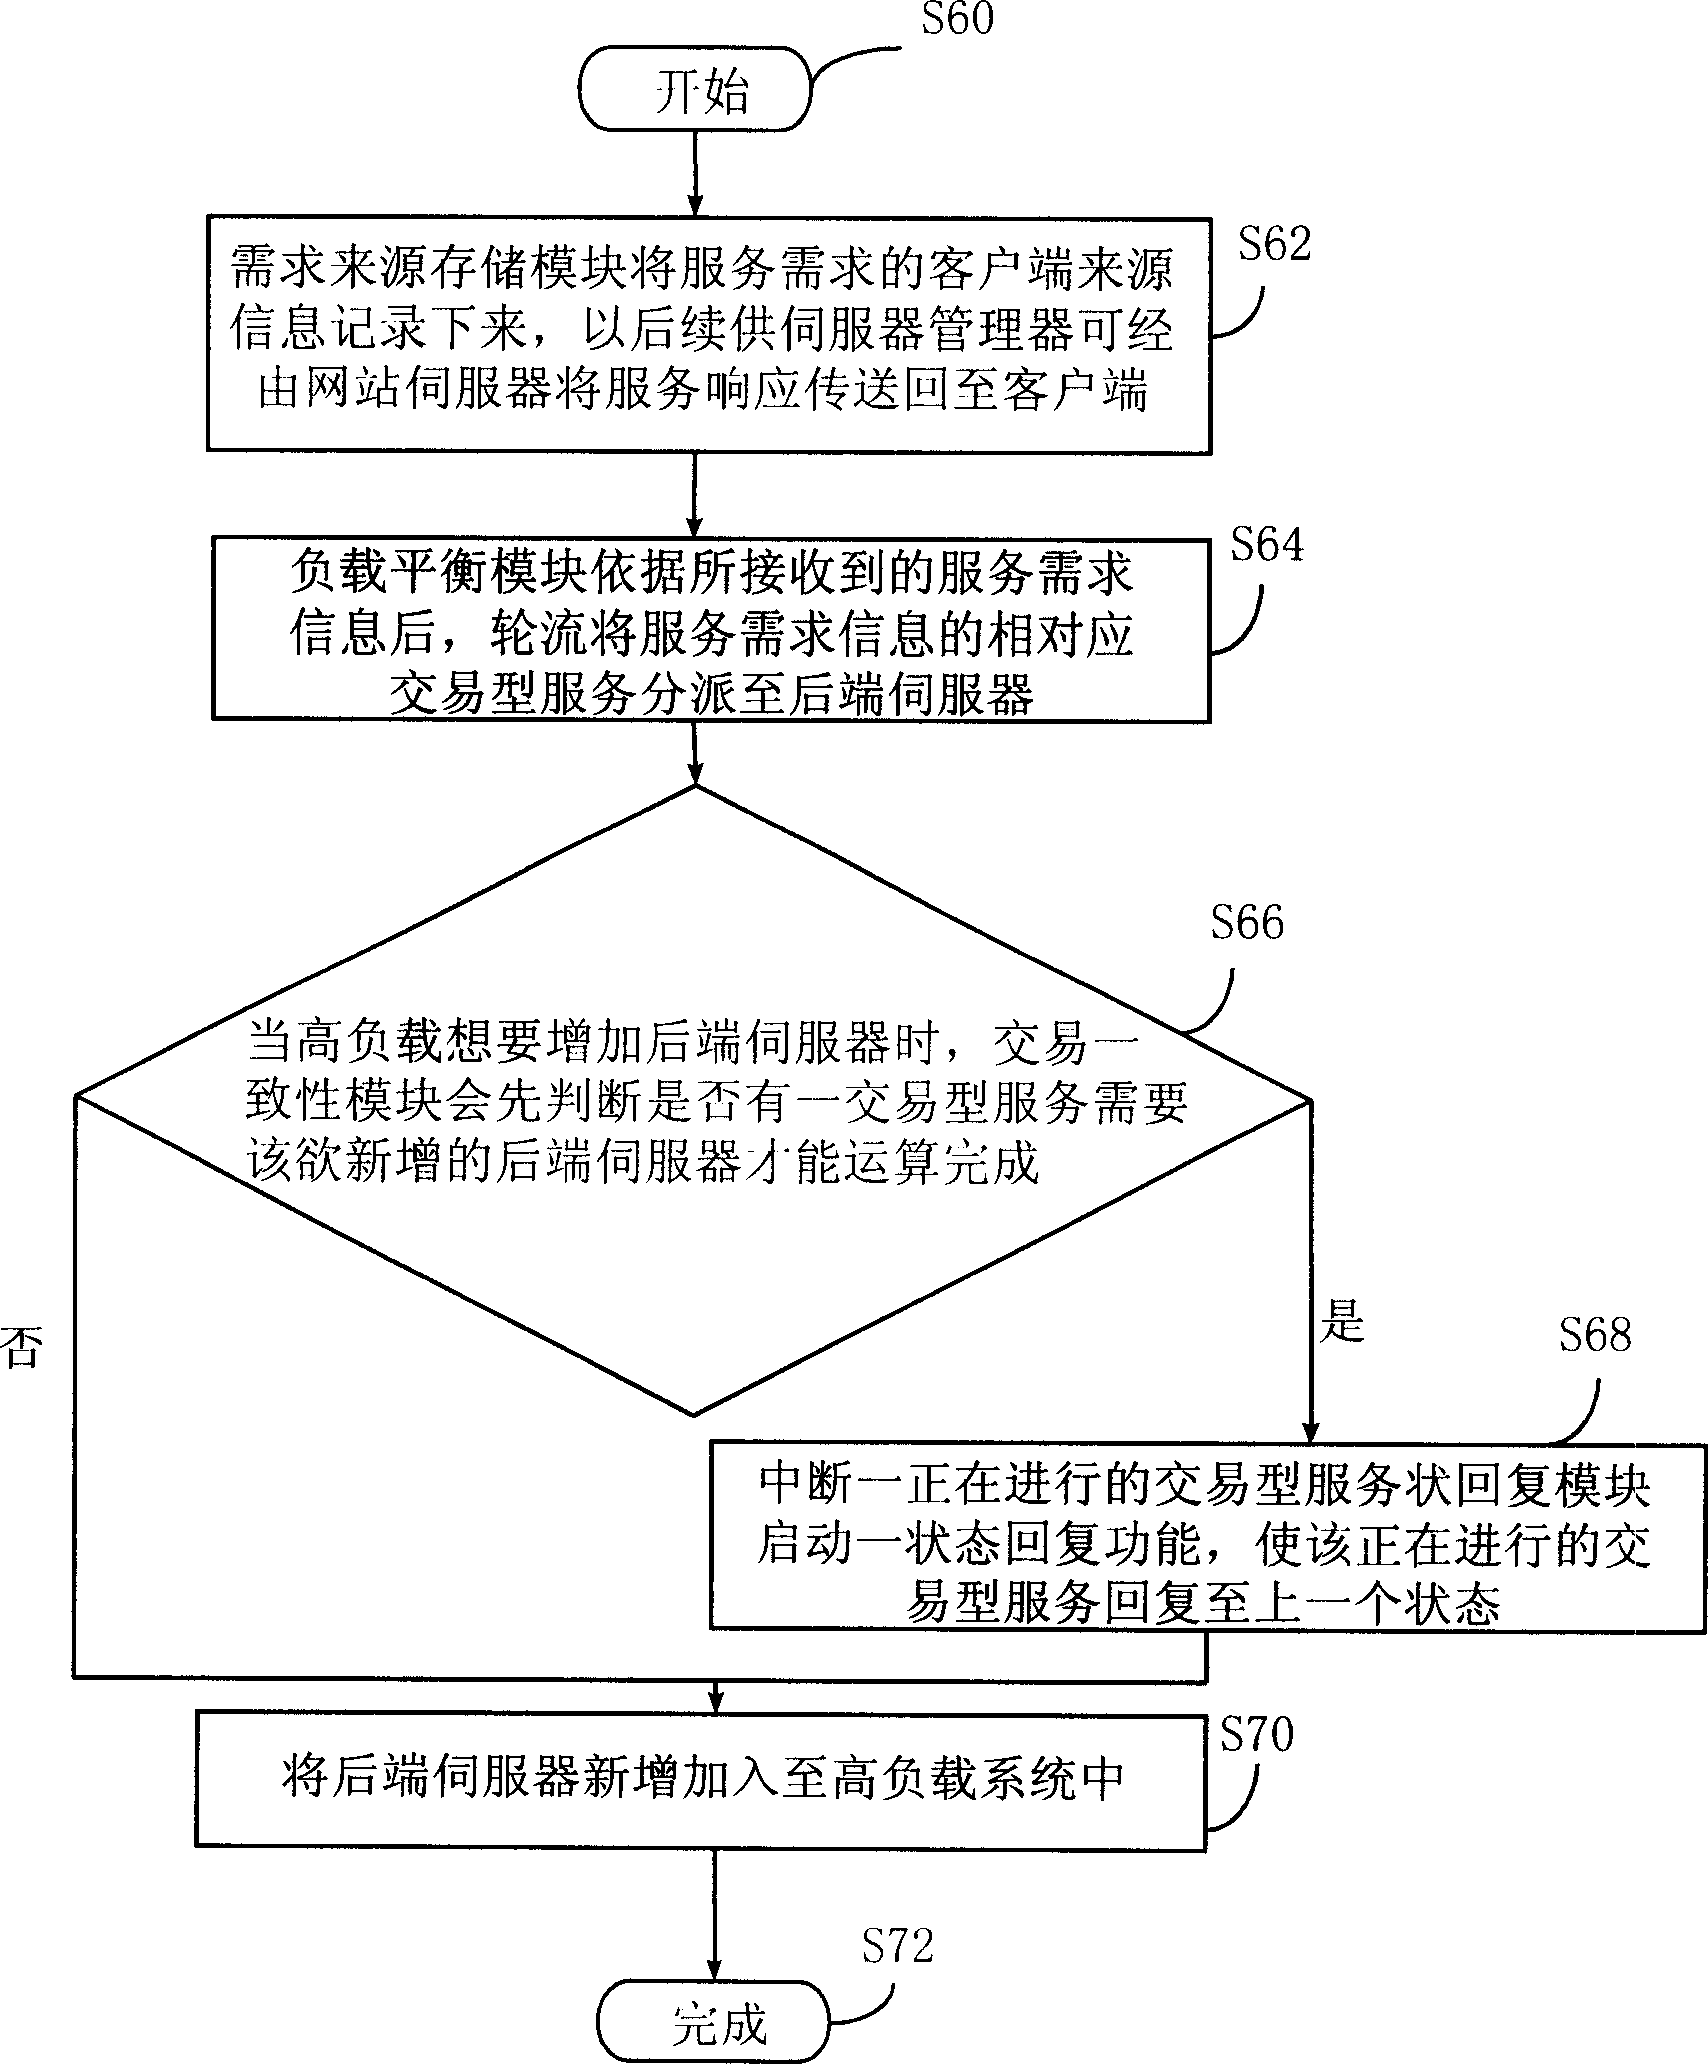 High-load system and service process for achieving the demand